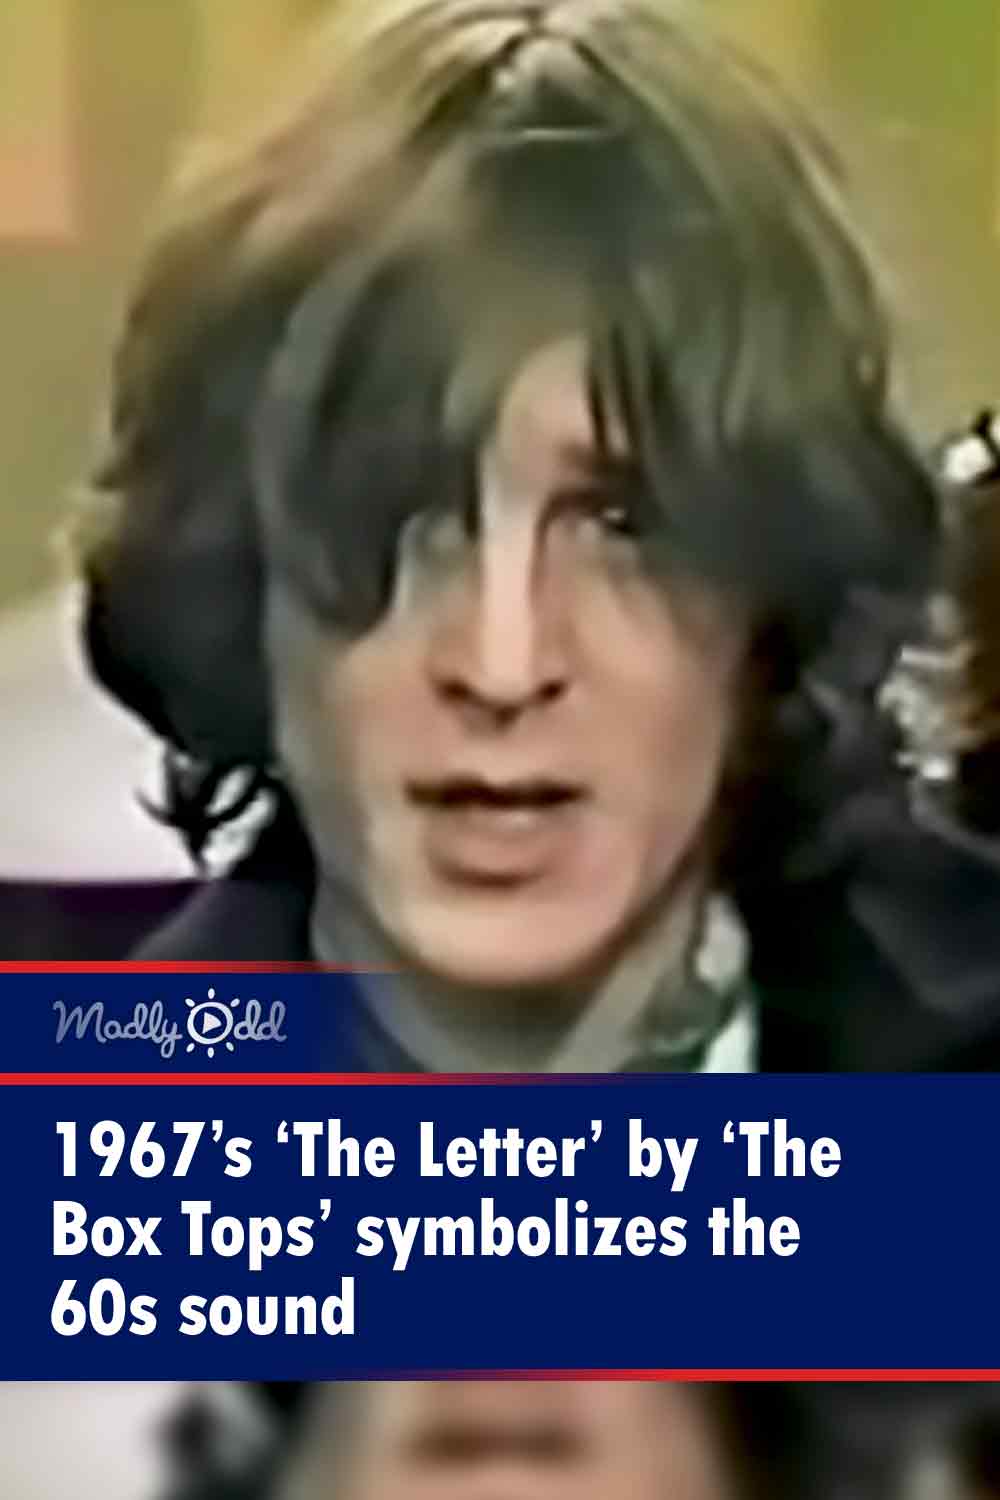 1967’s ‘The Letter’ by ‘The Box Tops’ symbolizes the 60s sound